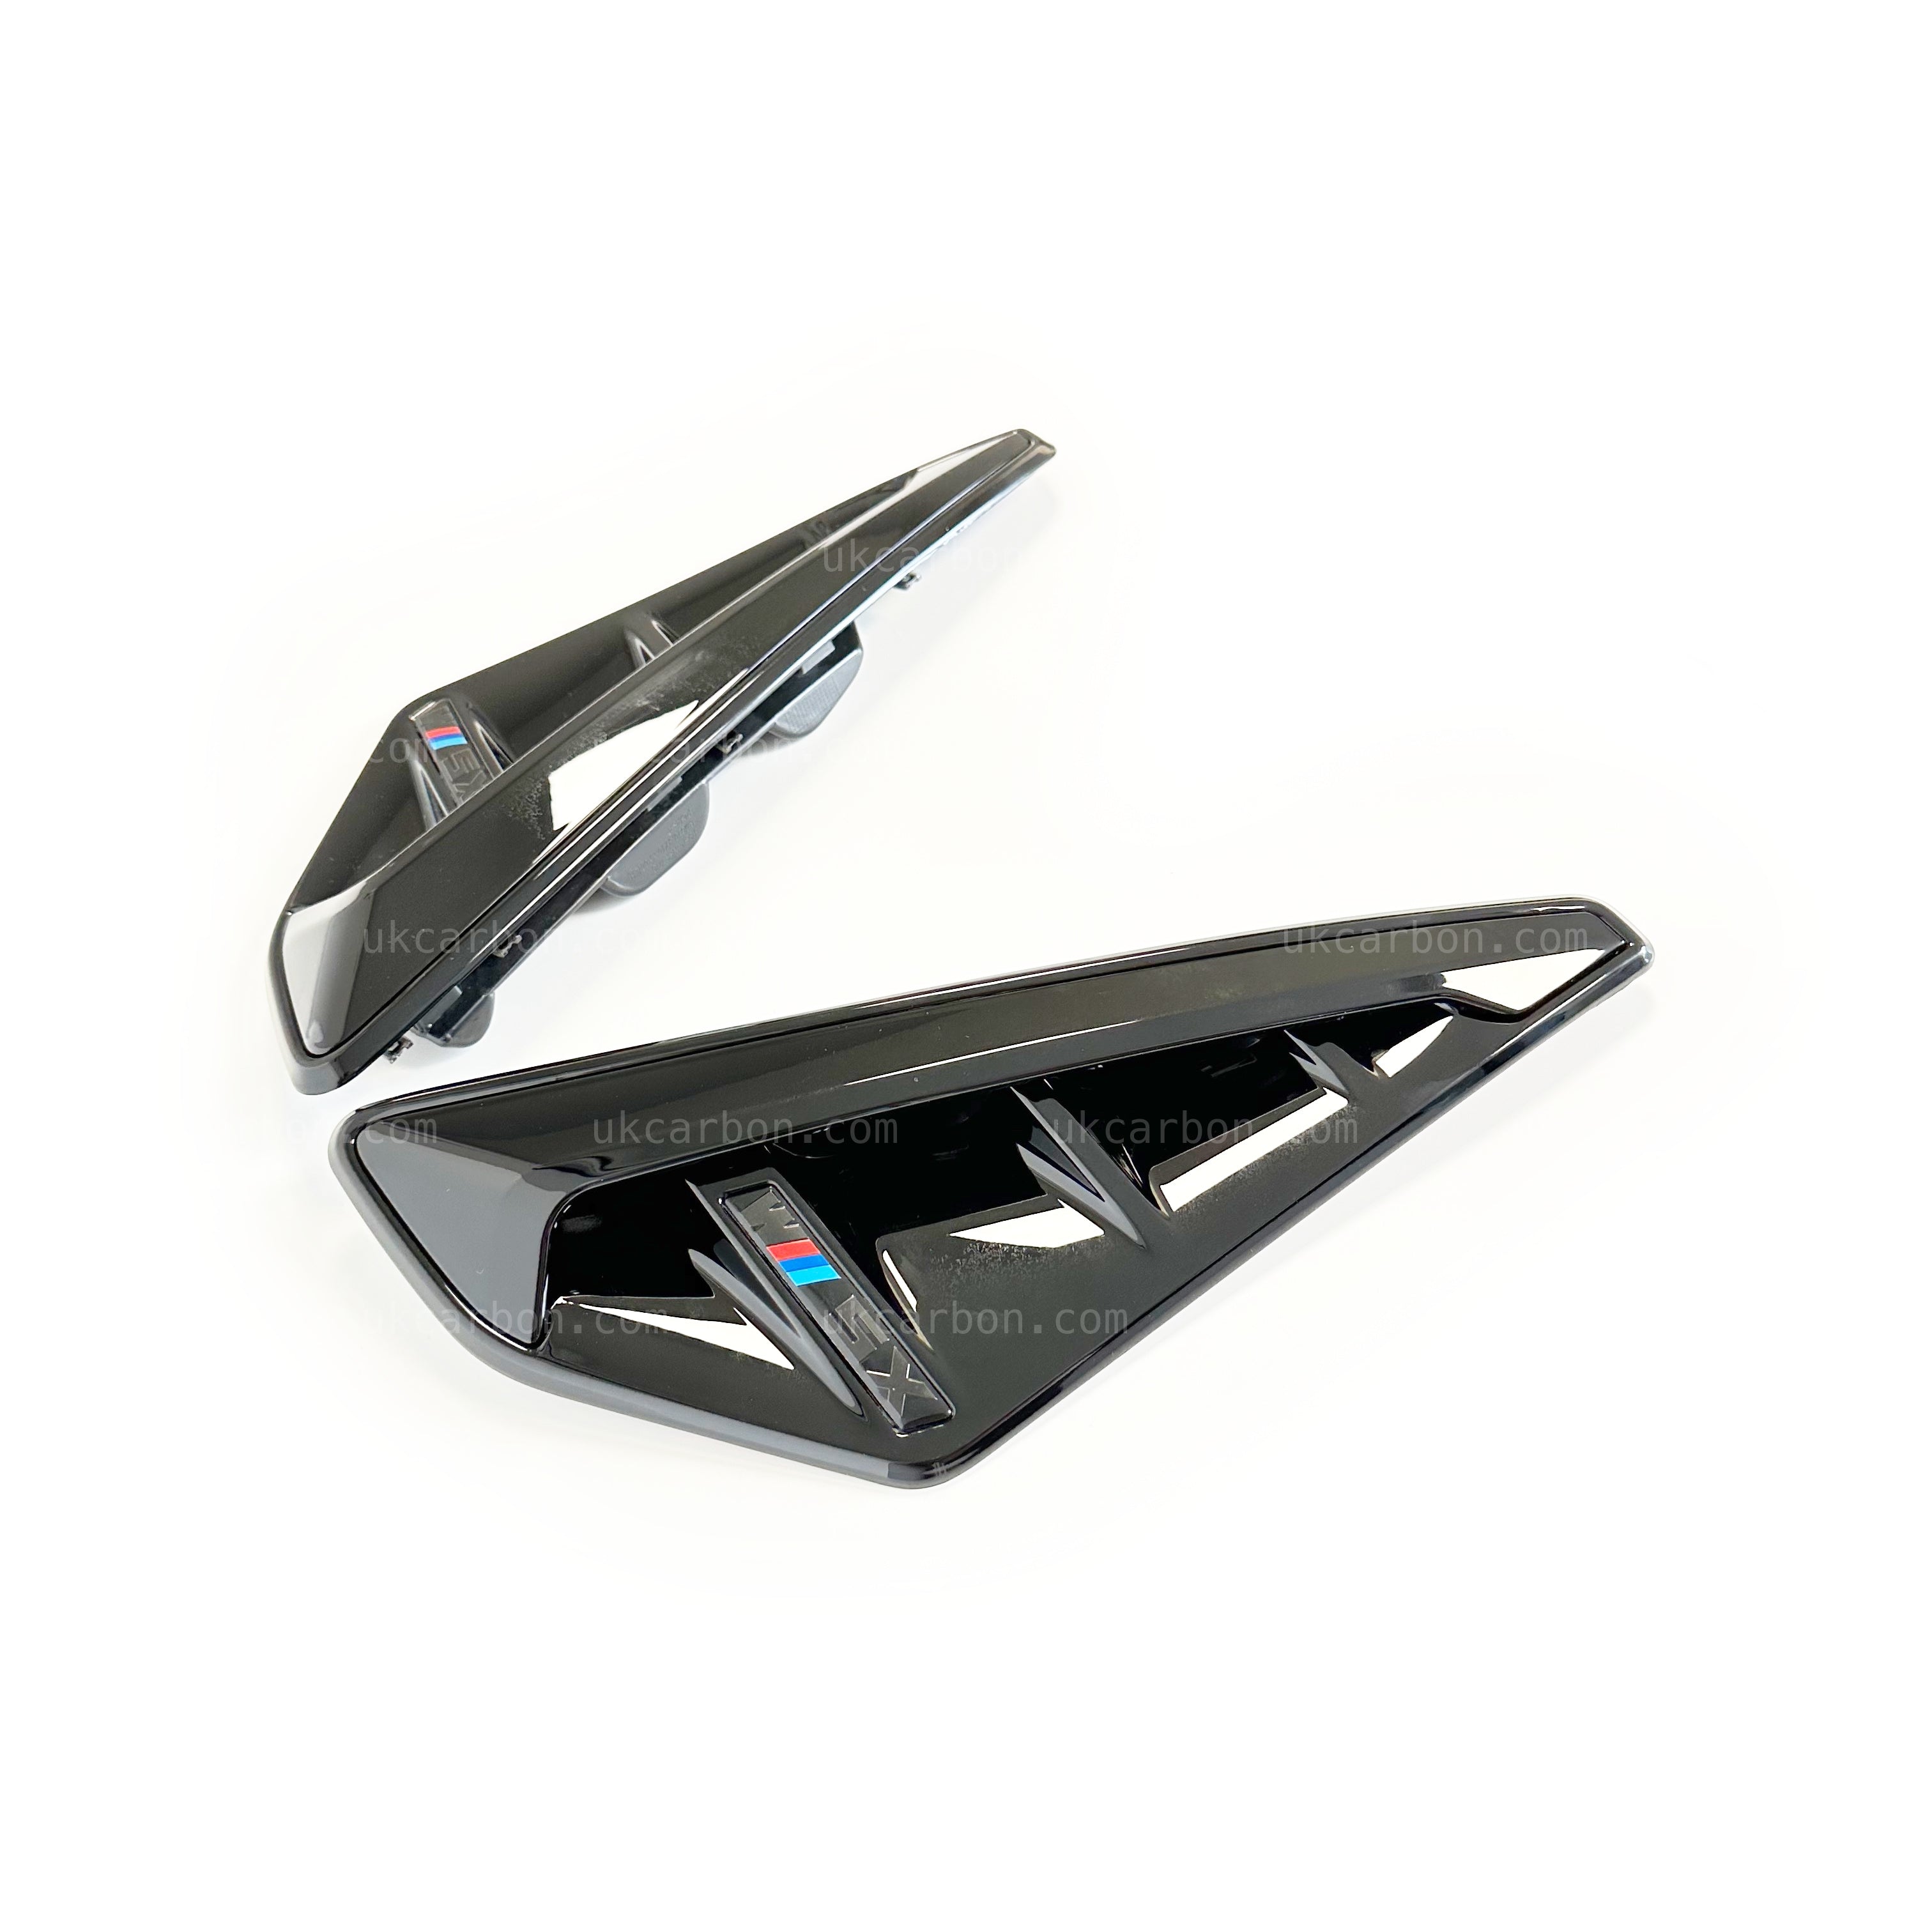 BMW X5 X5M Gloss Black Fender Vents Upgrade Cover Replacement G05 by UKCarbon